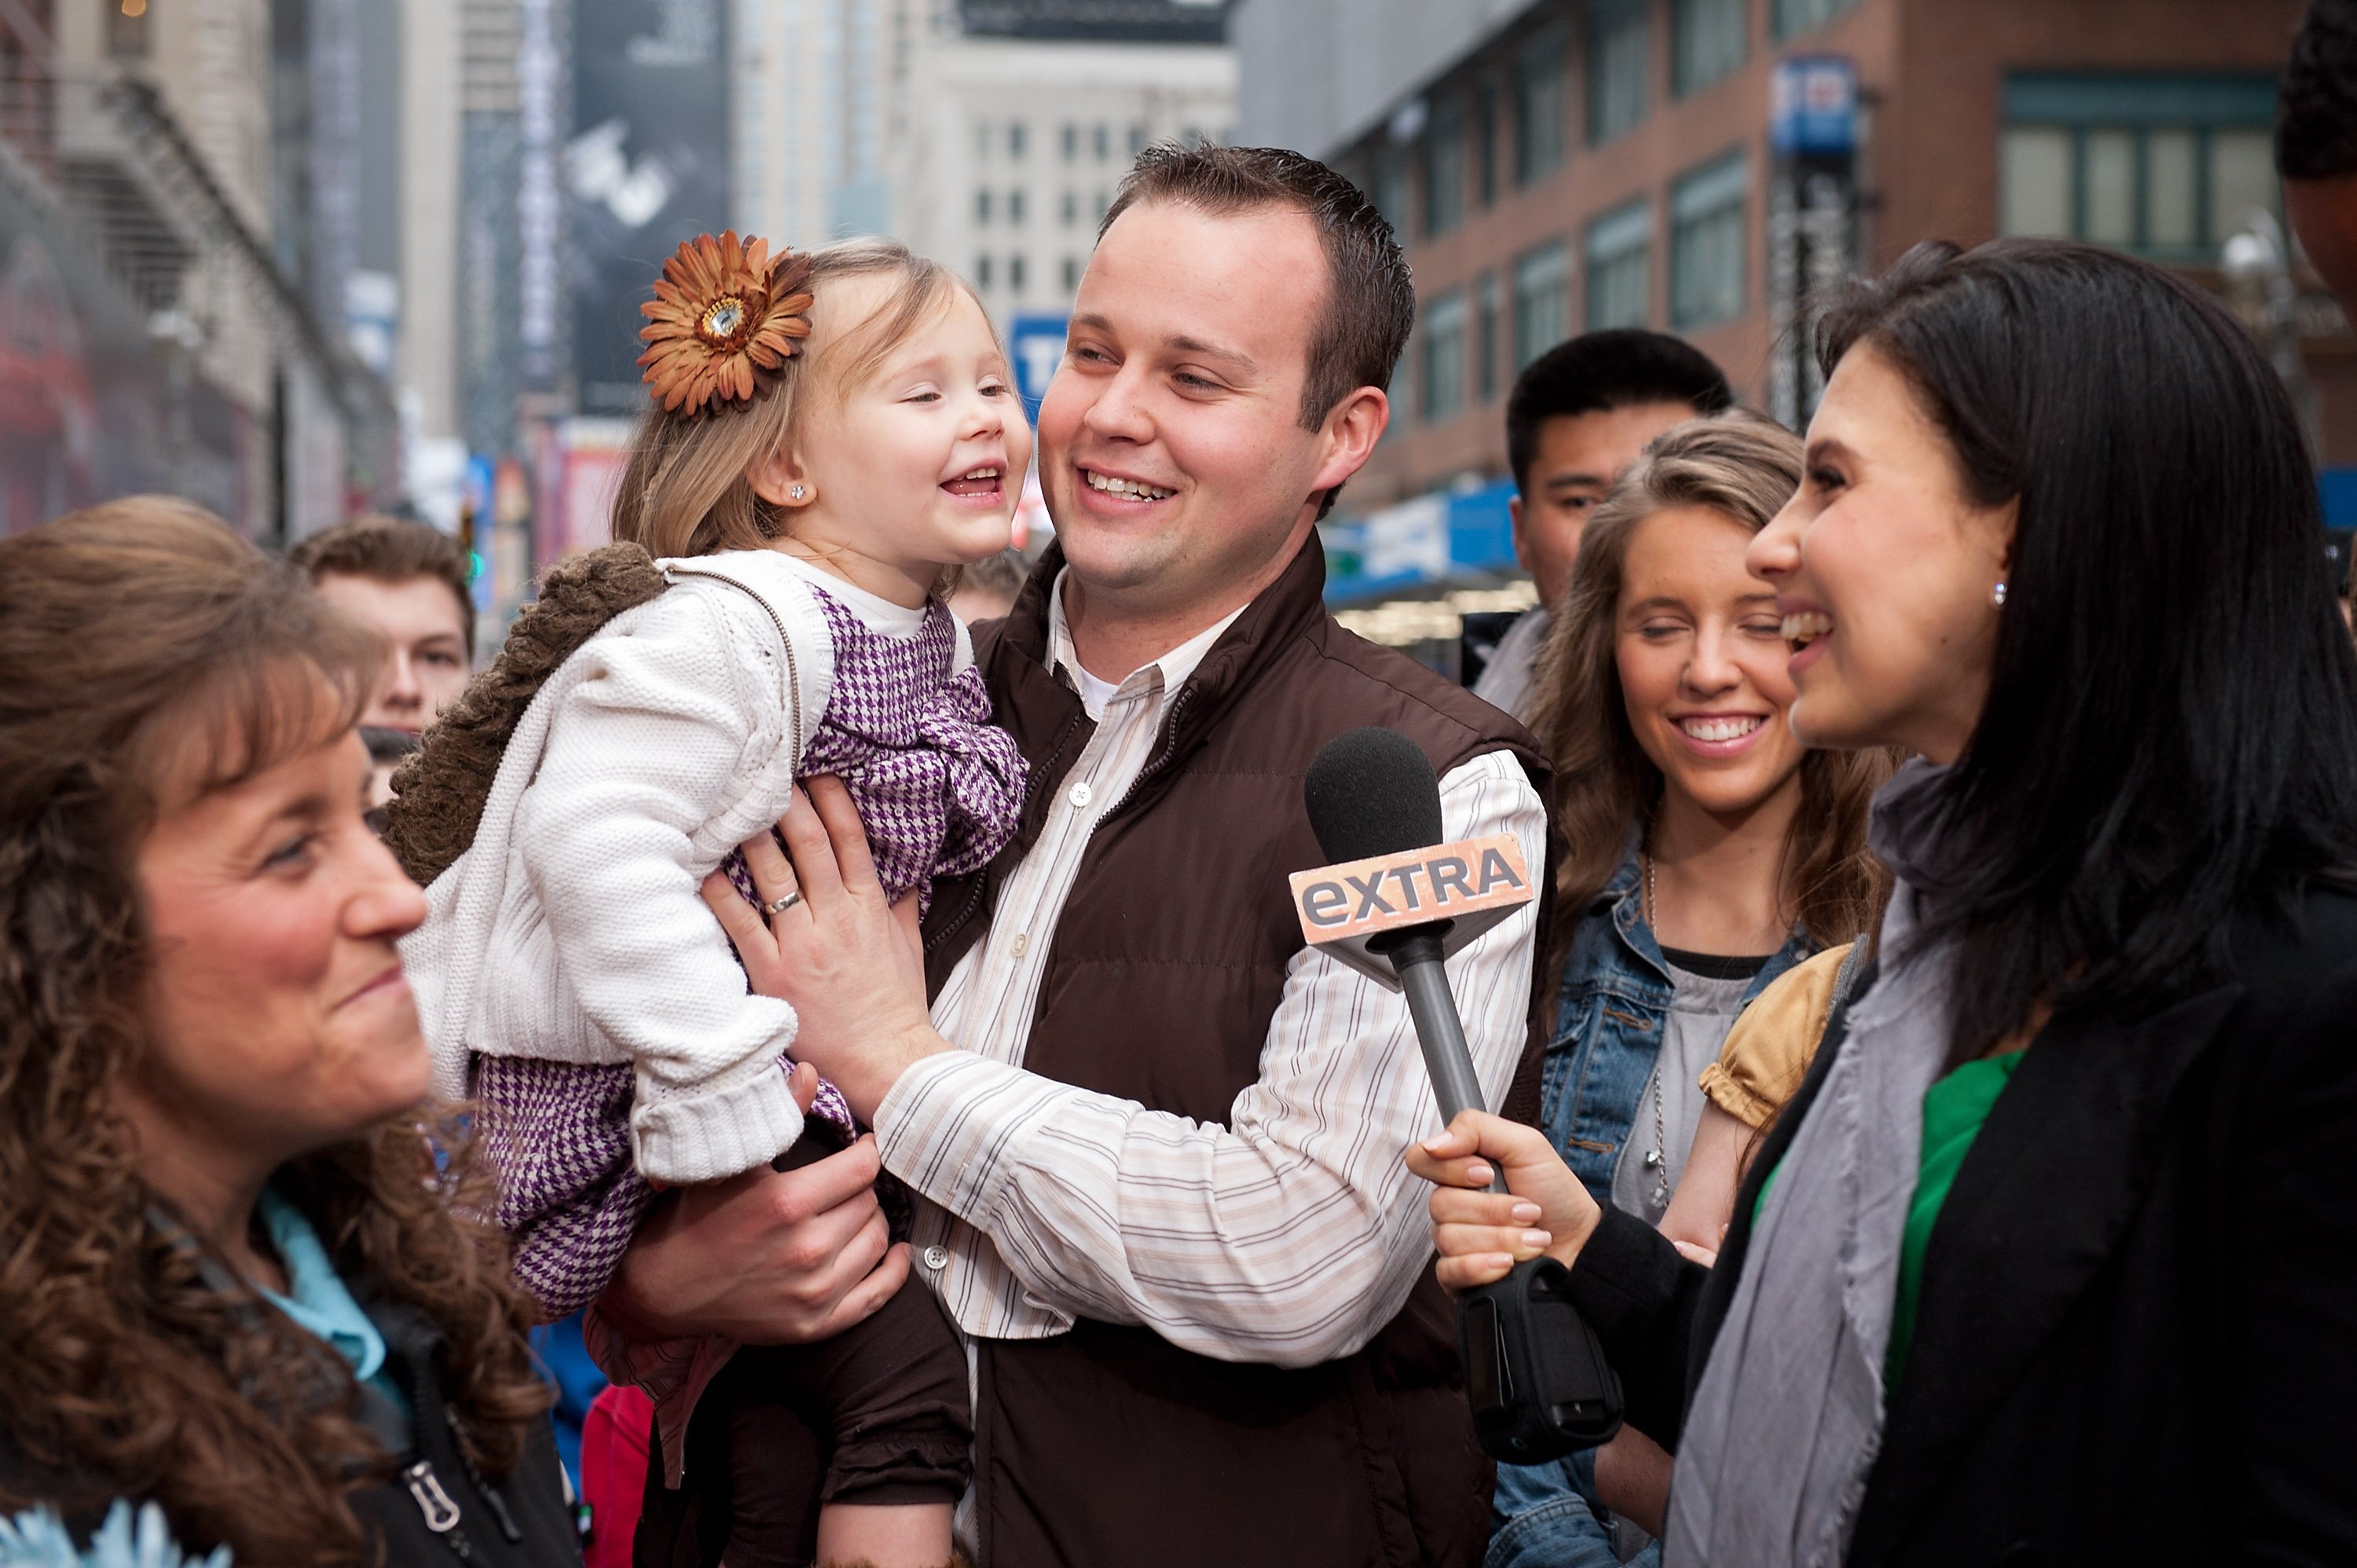 Josh Duggar holds daughter while being interviewed by Hilaria Baldwin